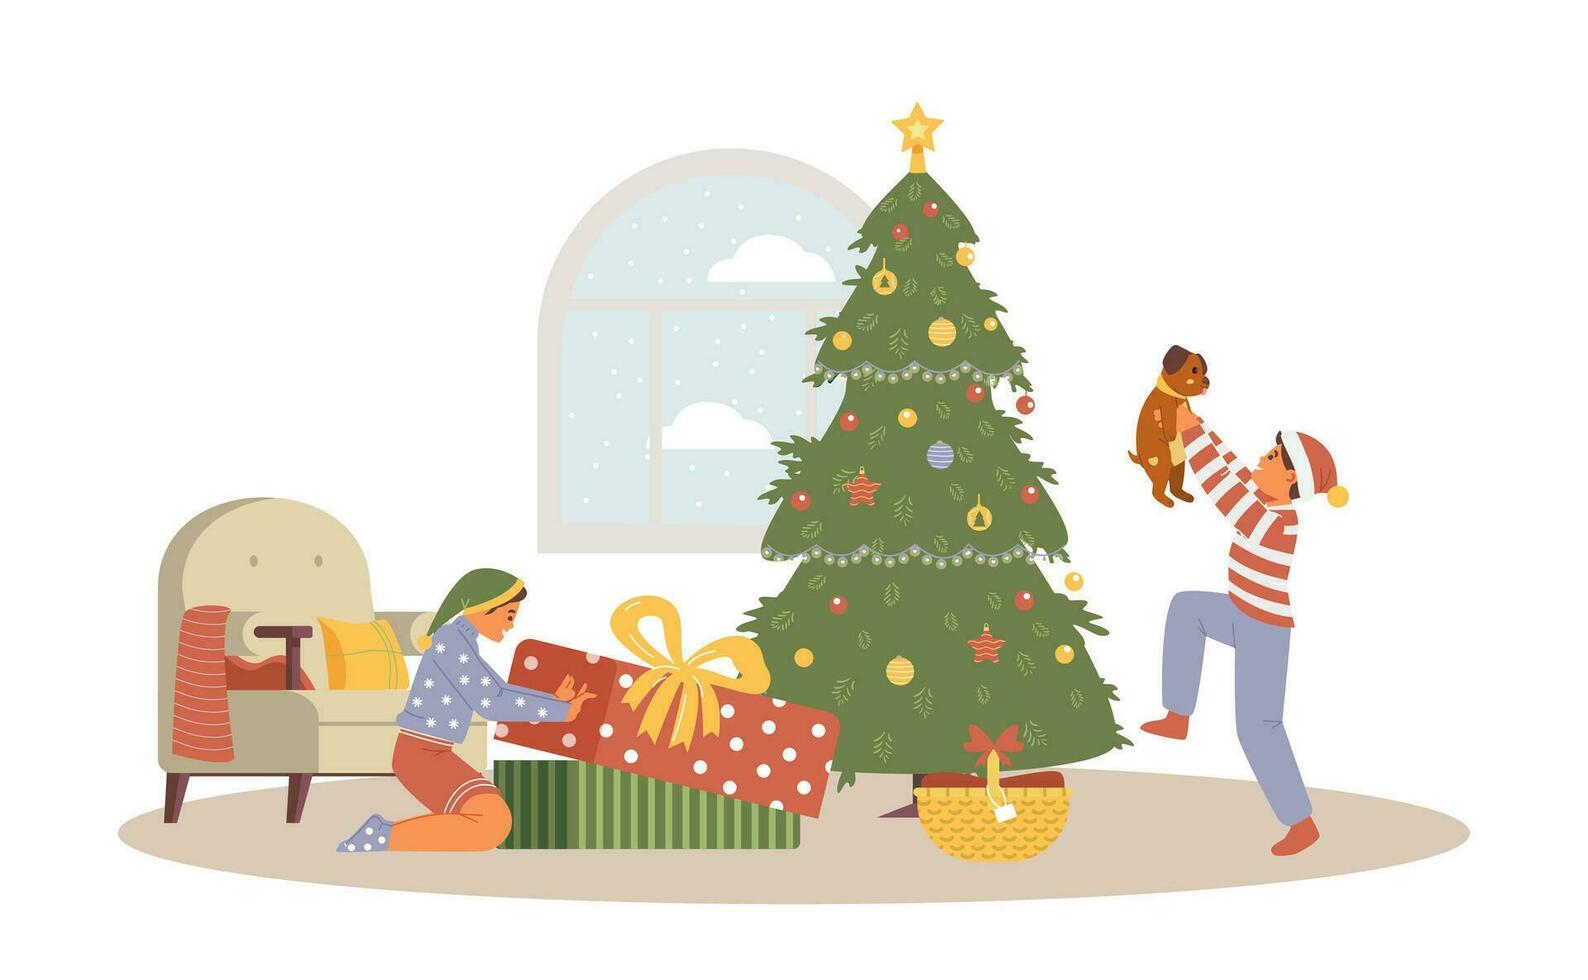 Brother and sister near Christmas tree opening gifts flat vector illustration. Excited kids boy and girl in Christmas outfit unwrapping presents. Girl opening big gift box. Boy holding puppy.